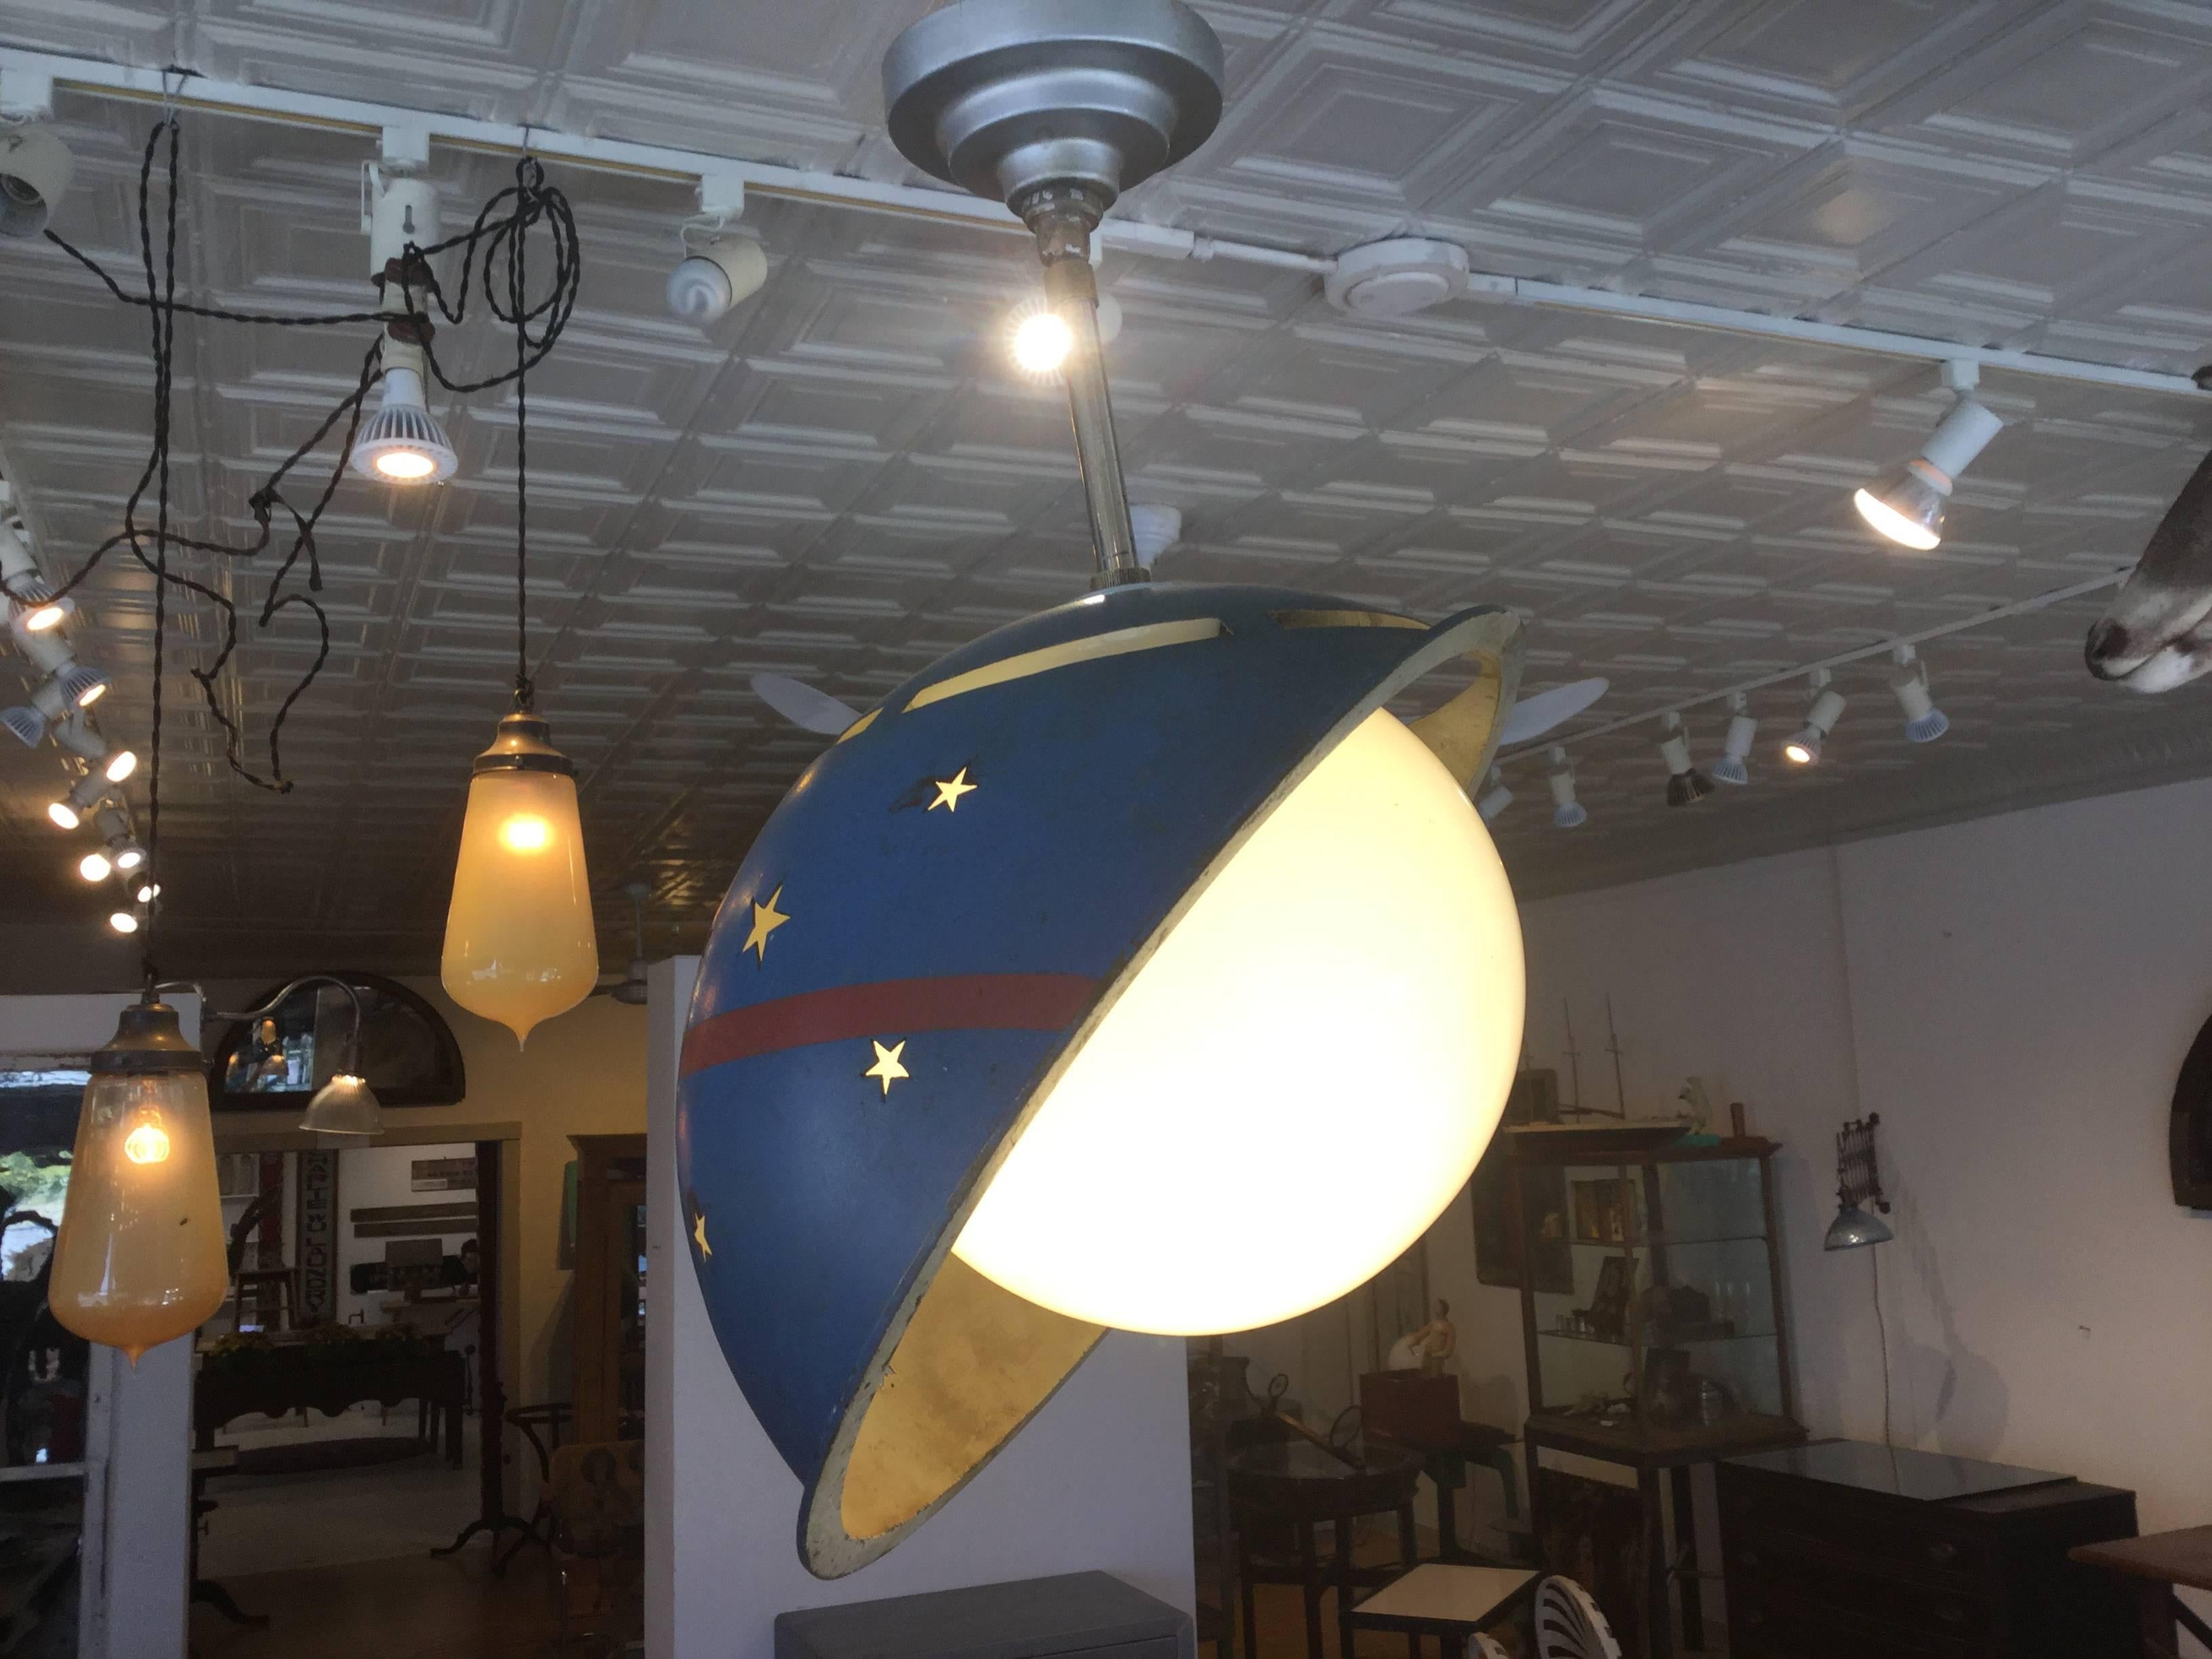 Hanging moon and stars Lamp. Blue painted Saturn shaped helmet made of steel surrounds a glass globe or moon. The stars are cut-out. All original paint. New wiring. Hangs about 8 inches from the ceiling.